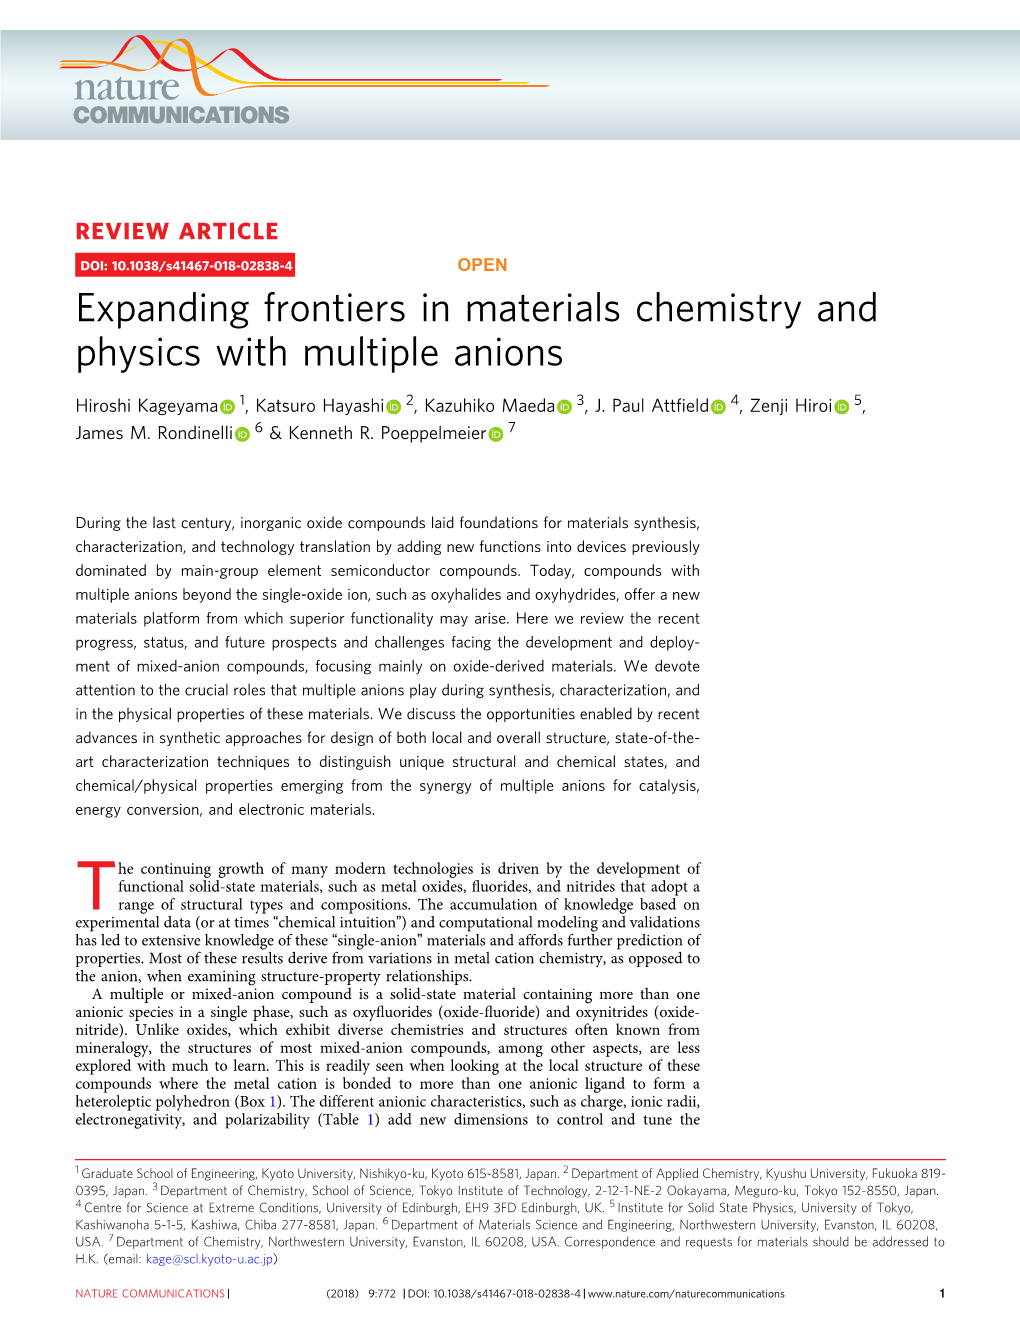 Expanding Frontiers in Materials Chemistry and Physics with Multiple Anions